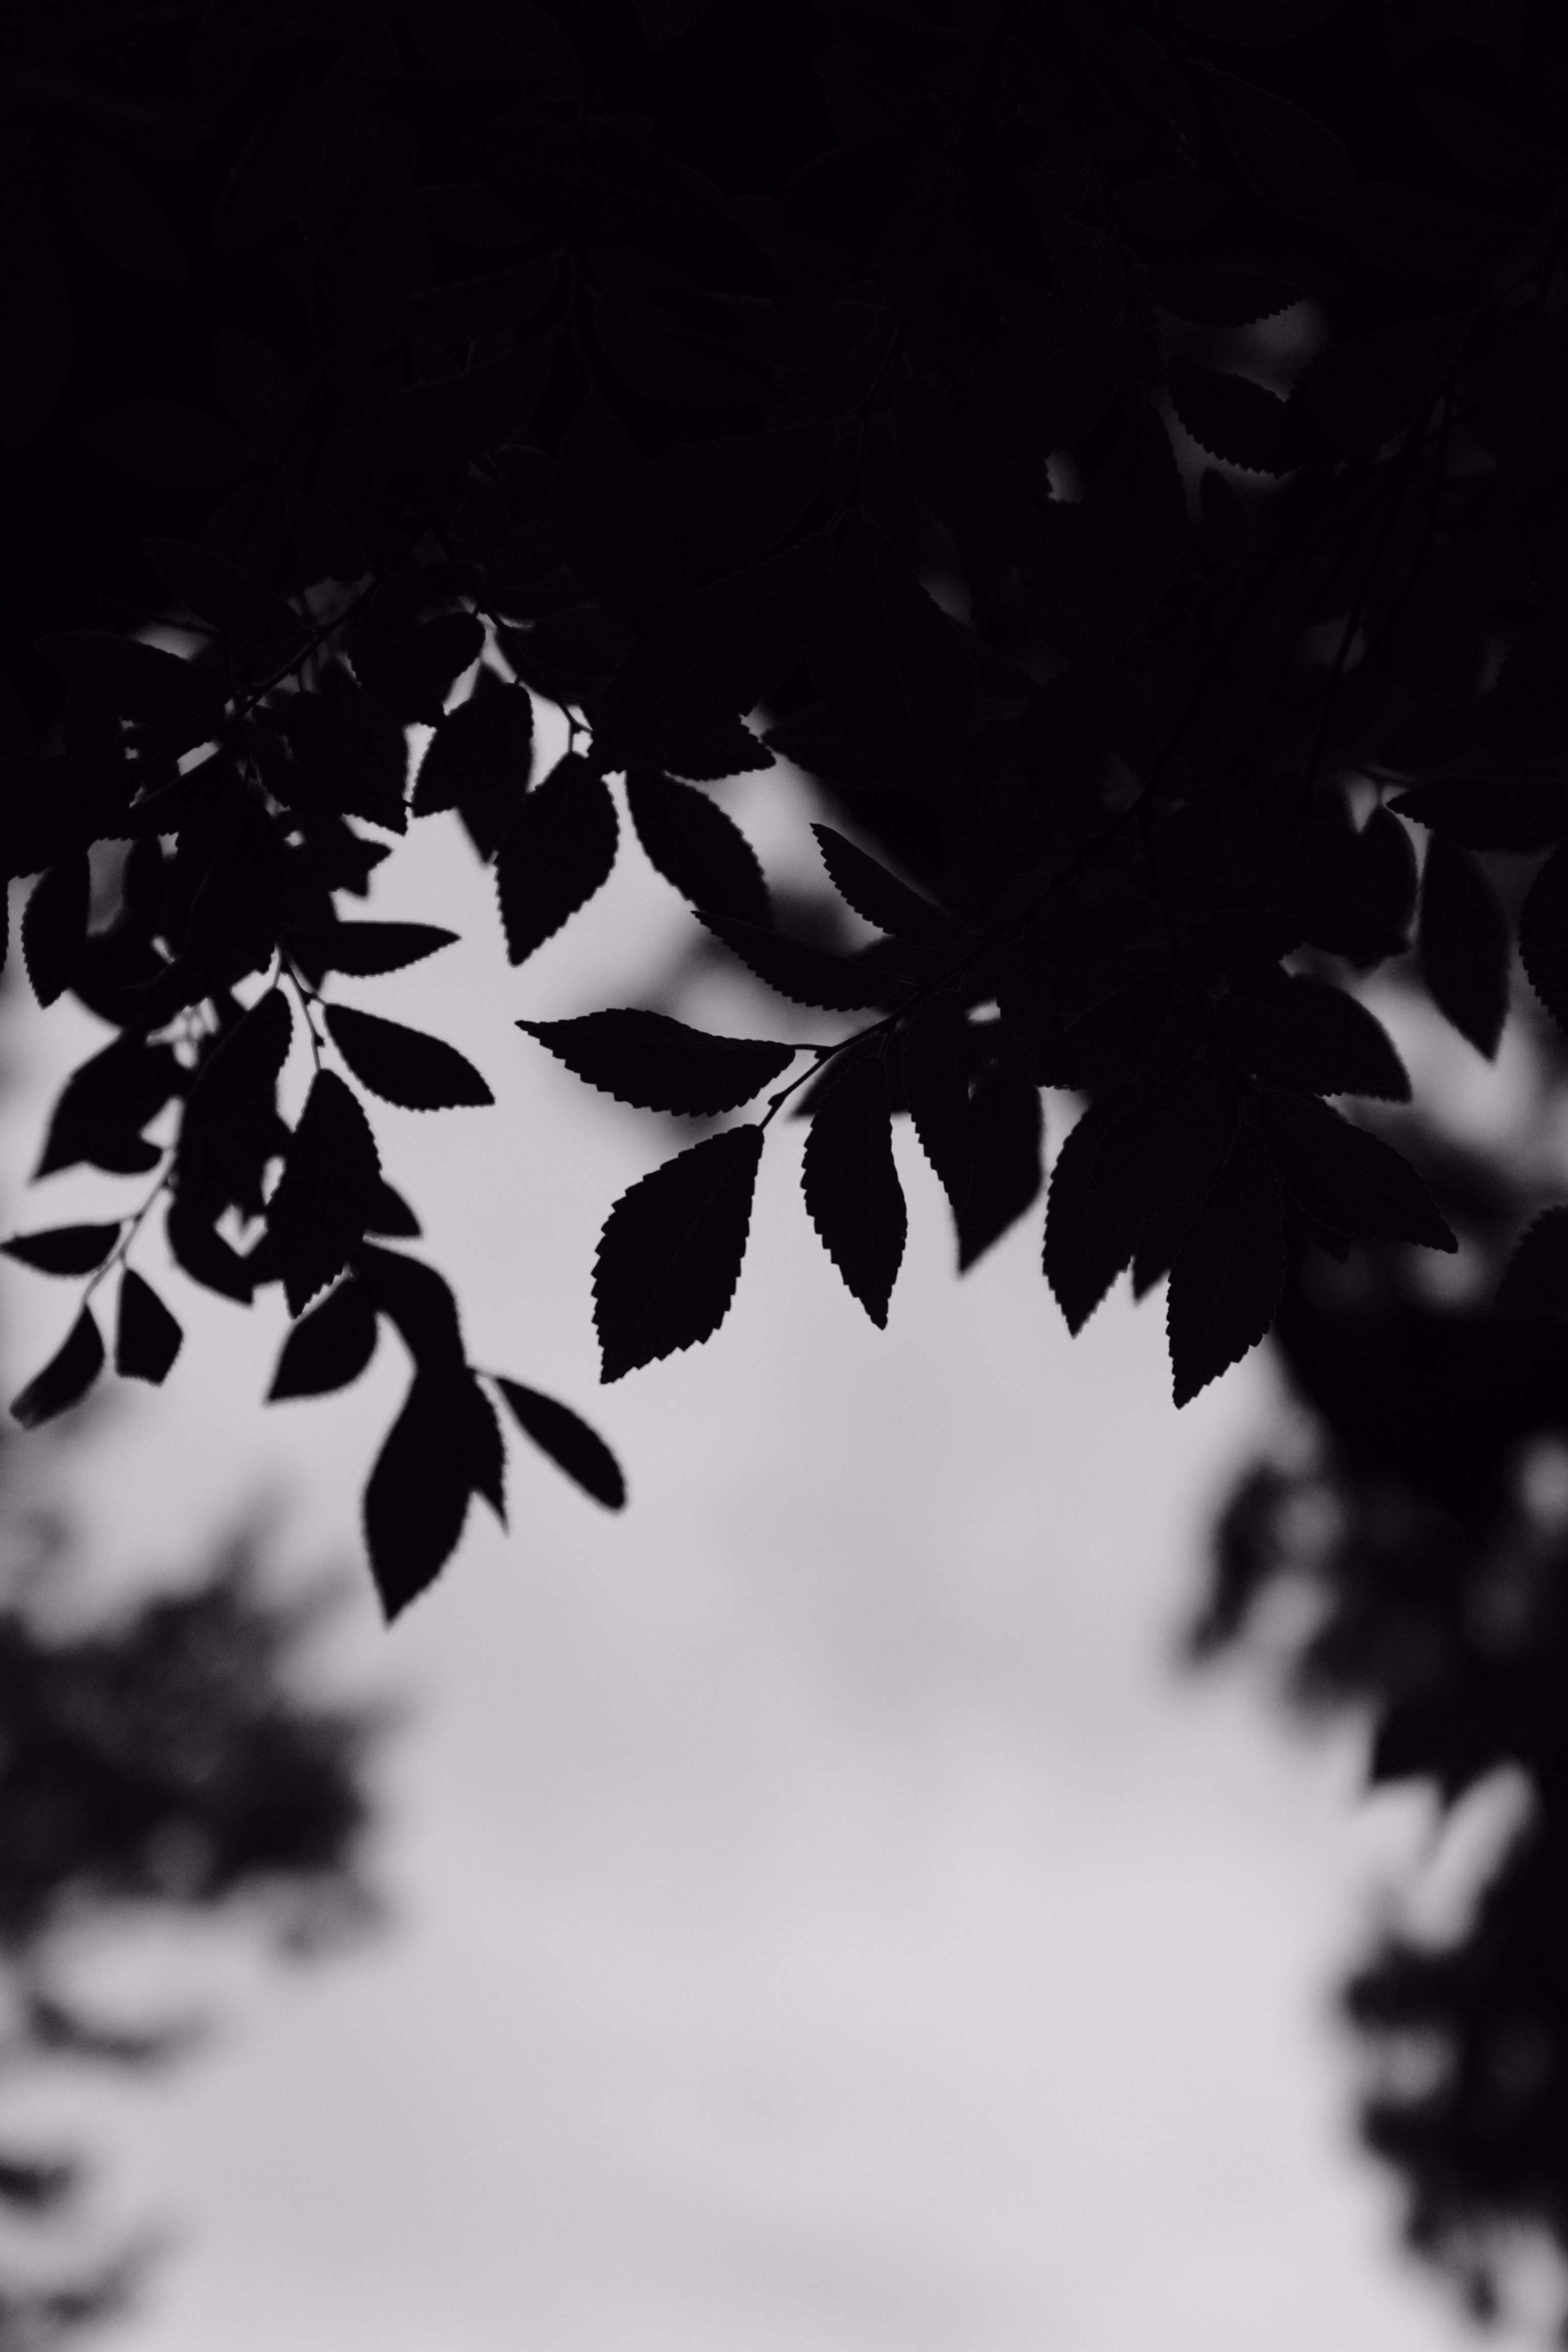 leaves, black, outlines, chb, branches, bw